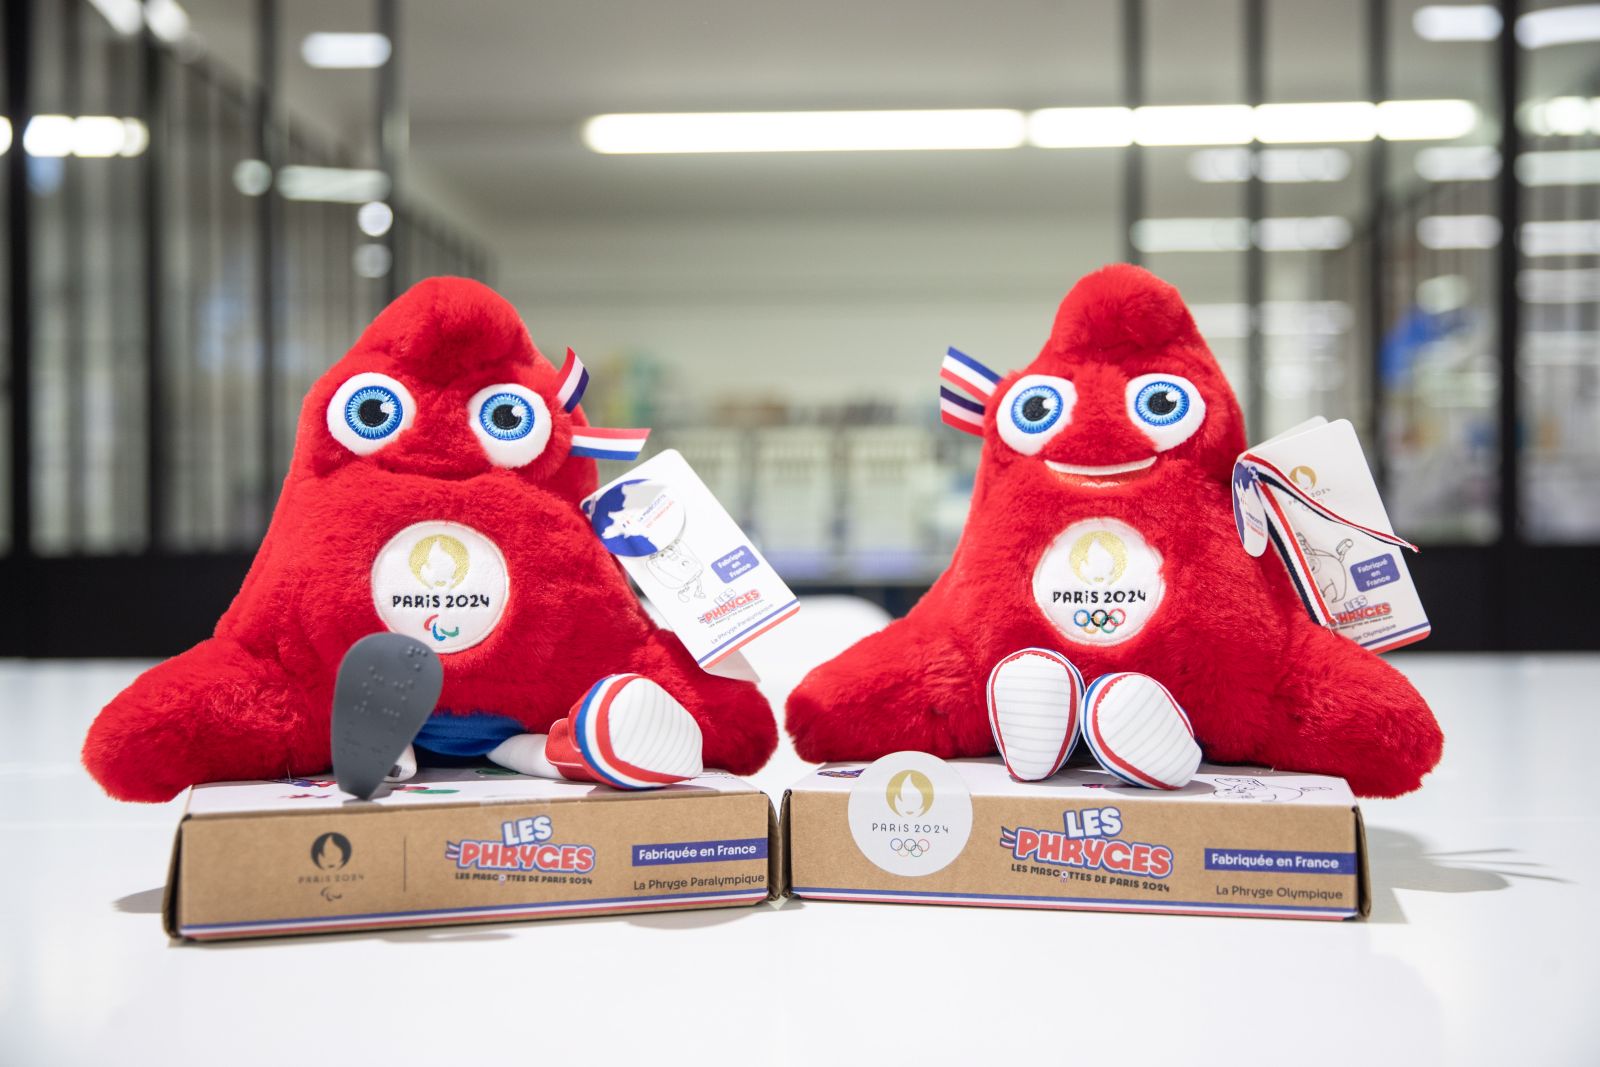 epa10402600 Two different examples, paralympic and not, of the Phrygian, the mascot of the Olympic Games Paris 2024, sit on a table in the factory of the group Doudou et Compagnie in La Guerche de Bretagne, France, 11 January 2023 (issued 13 January 2023). The Doudou et Companie group, specializing in the manufacture of plush toys since 1999, has begun producing the phrygians, the mascots of the Paris 2024 Olympic Games in January 2023. The design of the mascot is inspired by the Phrygian, a cap used during the French revolution. The group is looking to increase the number of seamstresses, from 23 to 50, in order to face the challenges of craft manufacturing, which aims to make more than 500 plush toys per day in full production. The group is responsible for the production of 60 percent of the mascot collections, of which 20 percent will be produced in France, representing 400,000 mascots.  EPA/TERESA SUAREZ